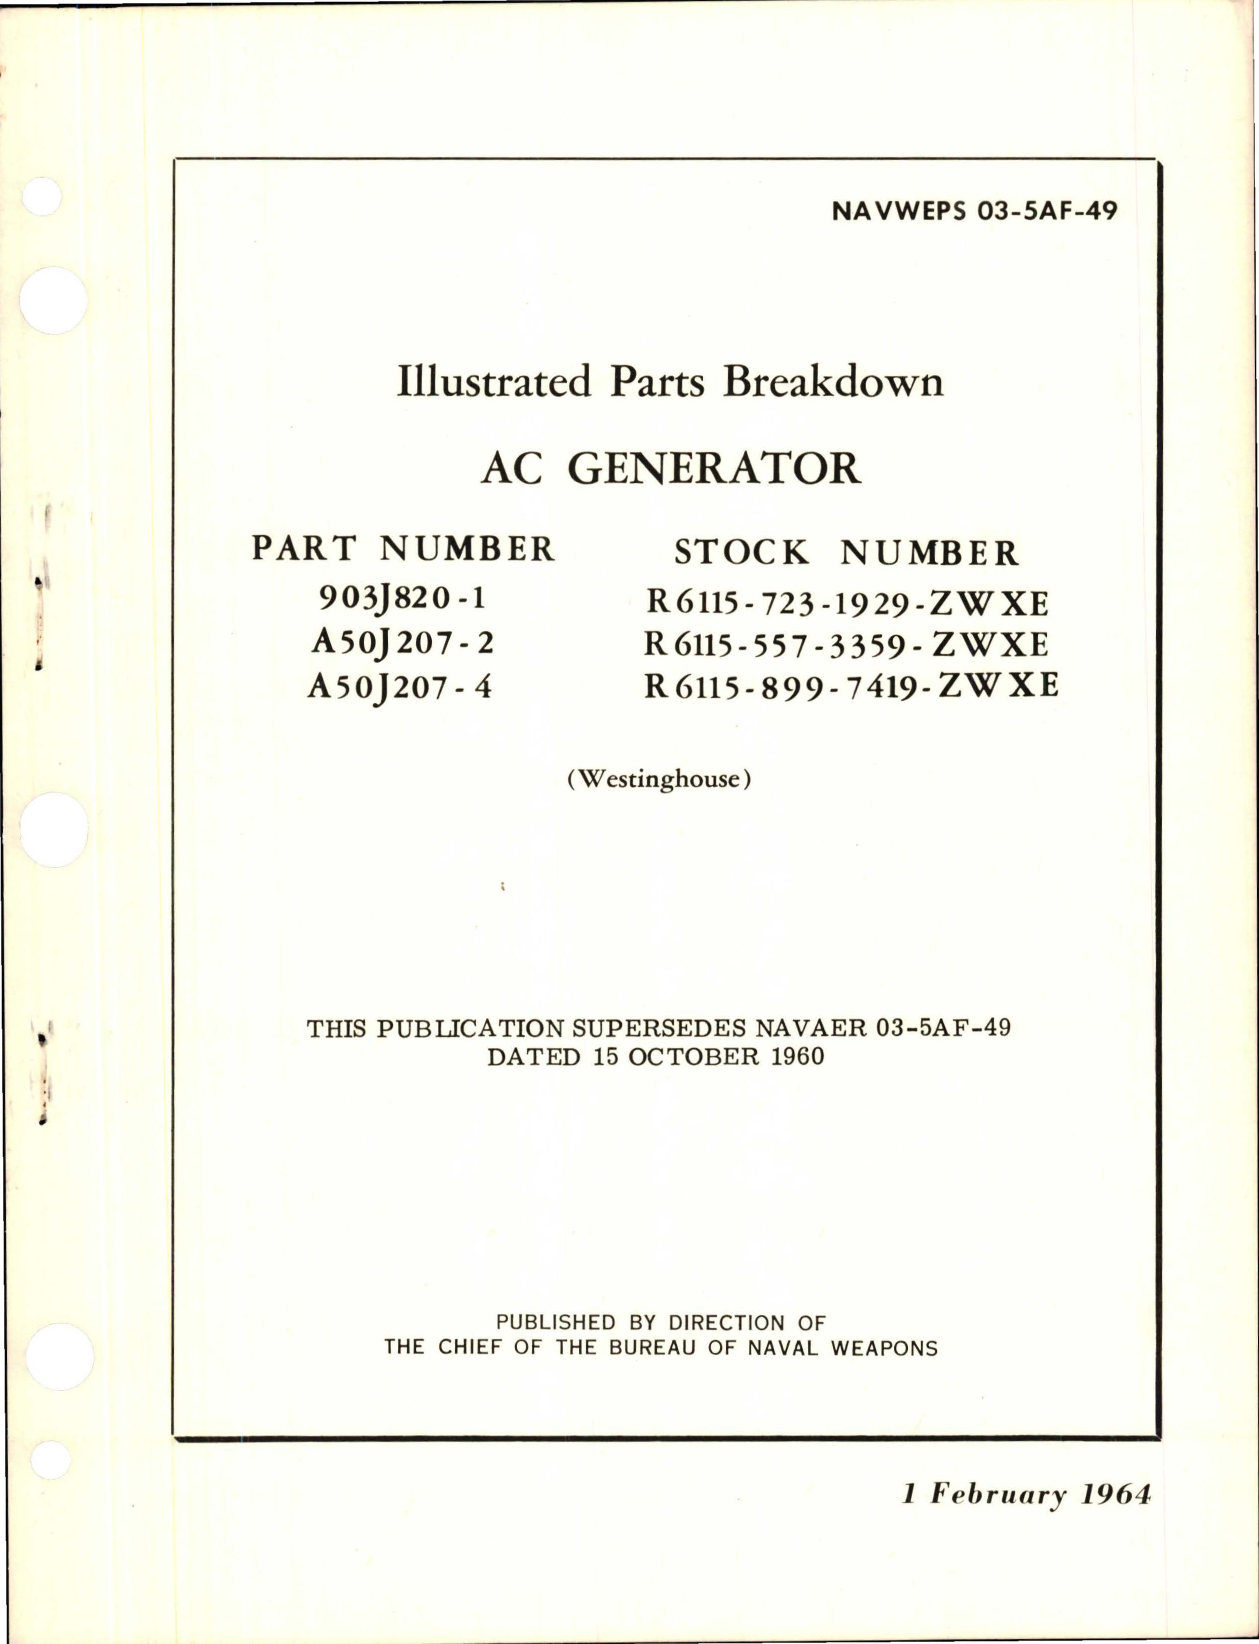 Sample page 1 from AirCorps Library document: Illustrated Parts Breakdown for AC Generator - Parts 903J820-1, A50J207-2, and A50J207-4 